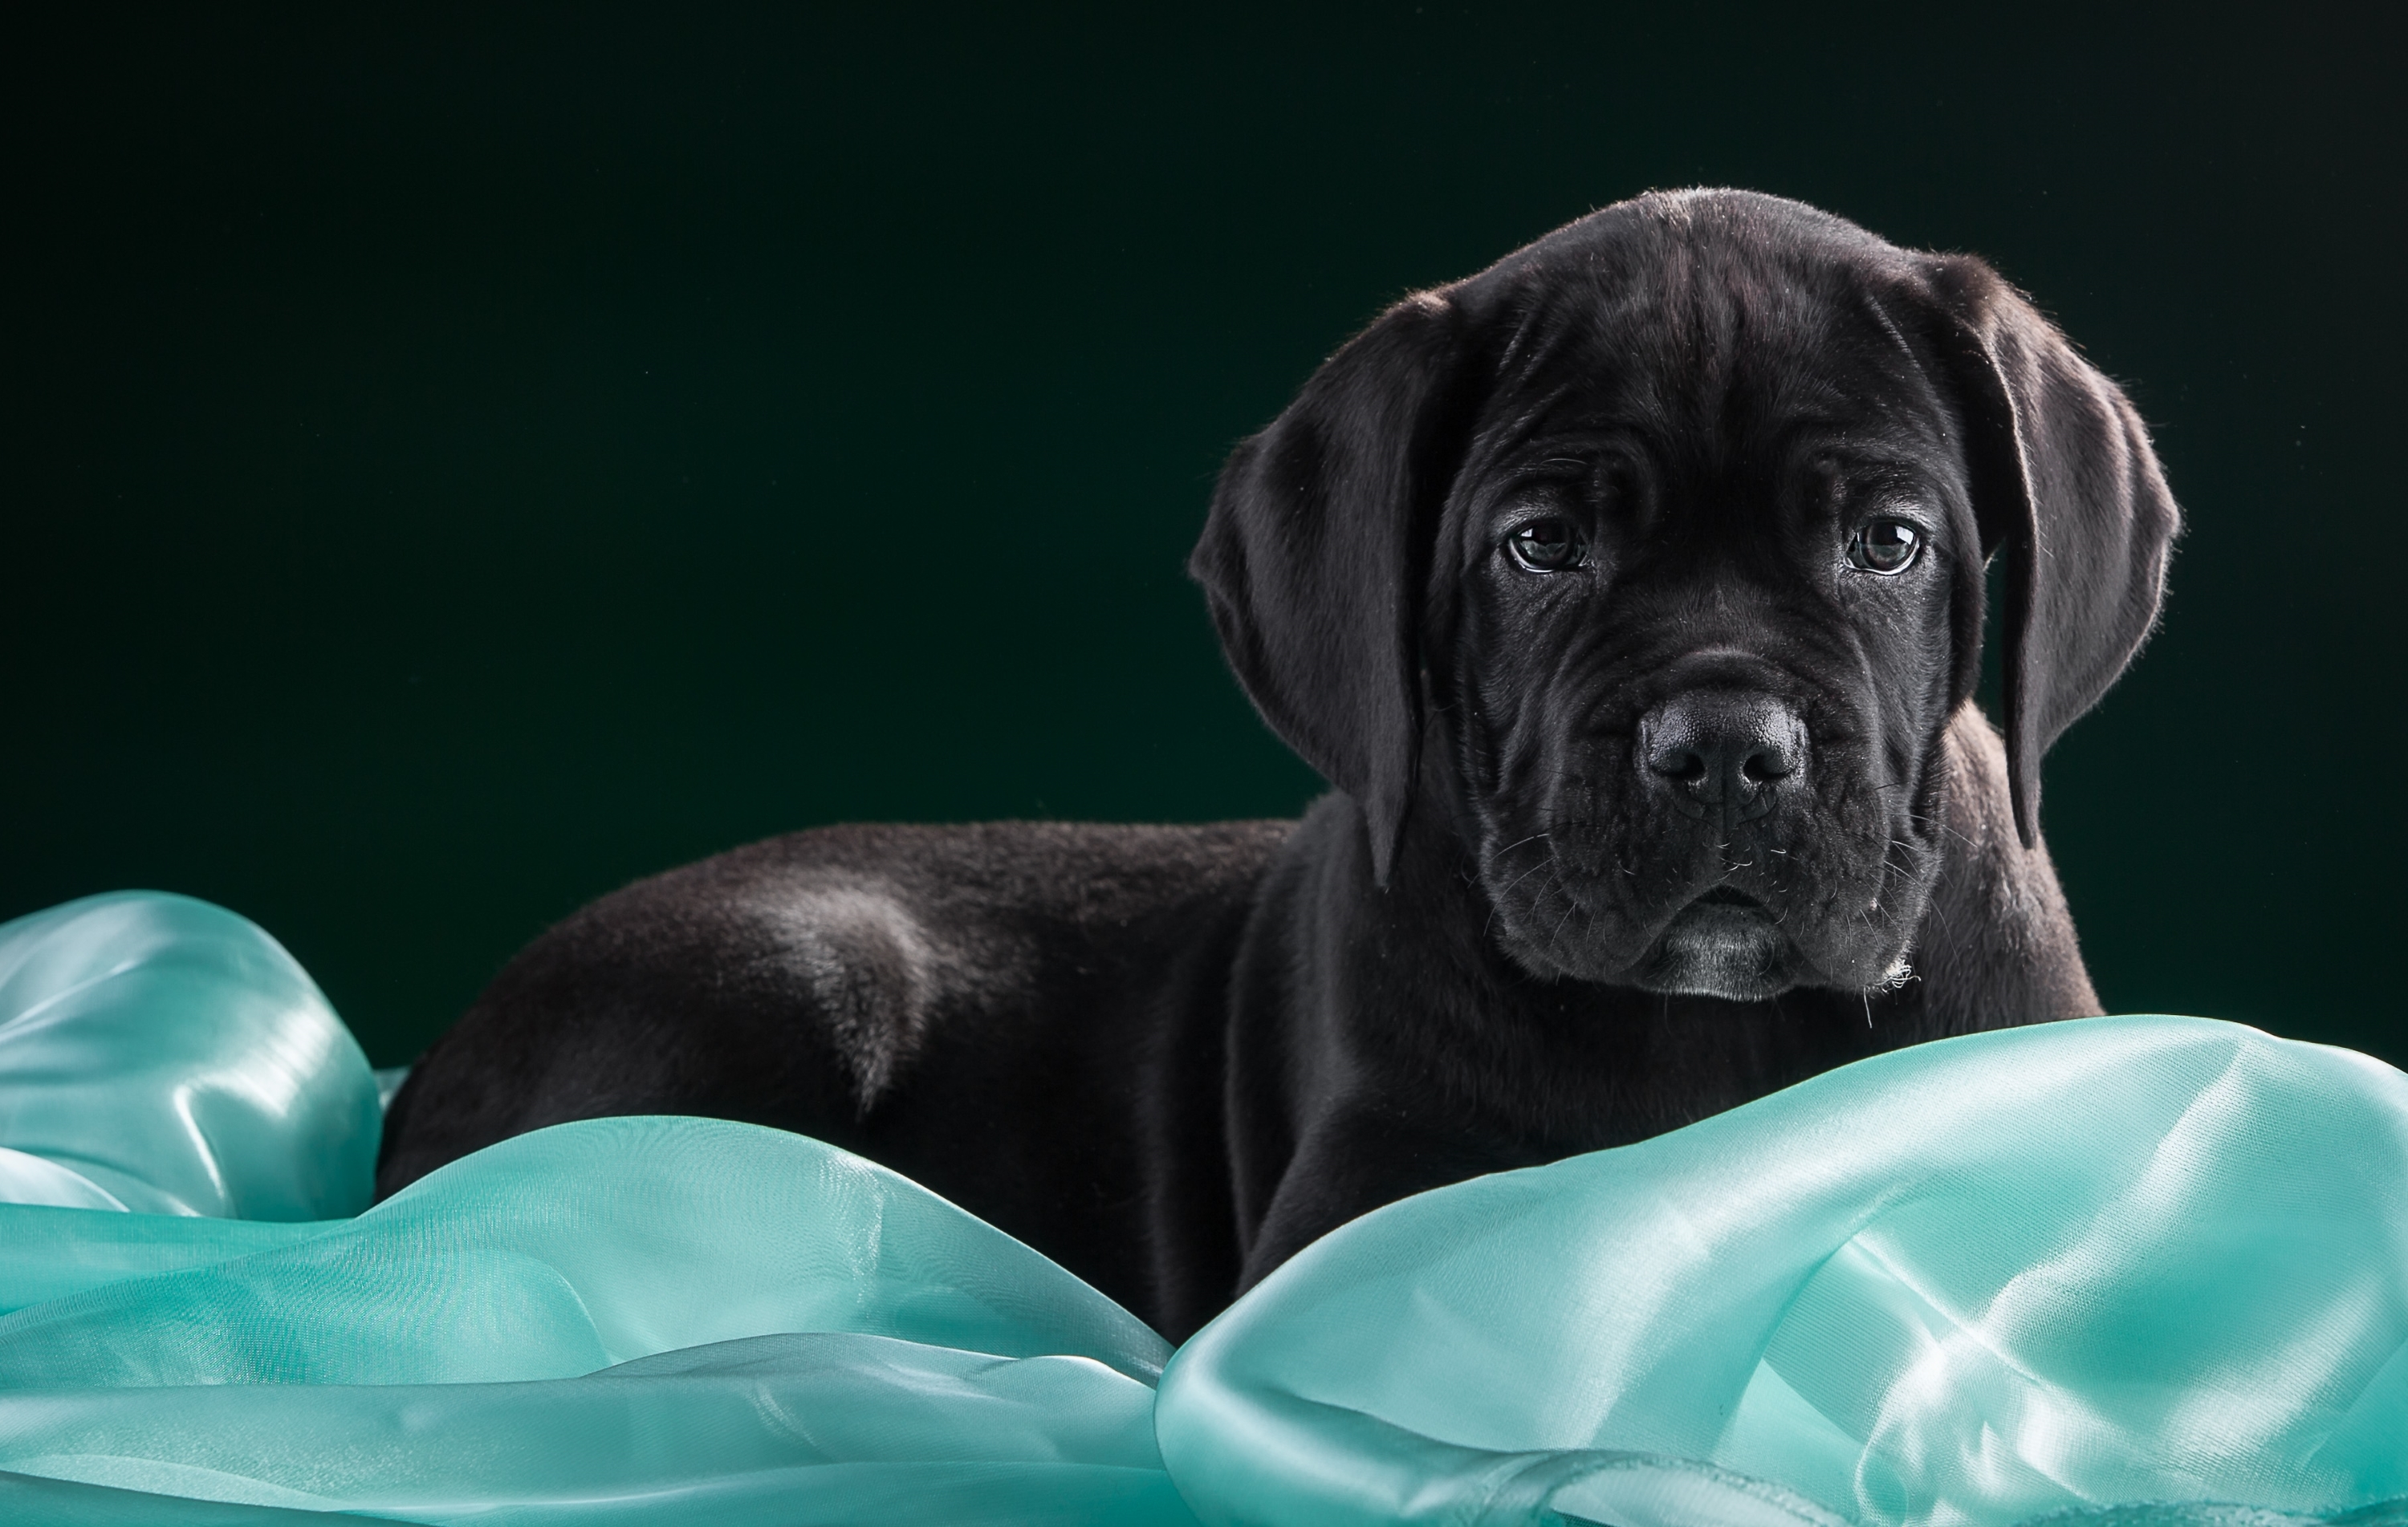 Wallpaper look dog Cane Corso images for desktop section собаки   download